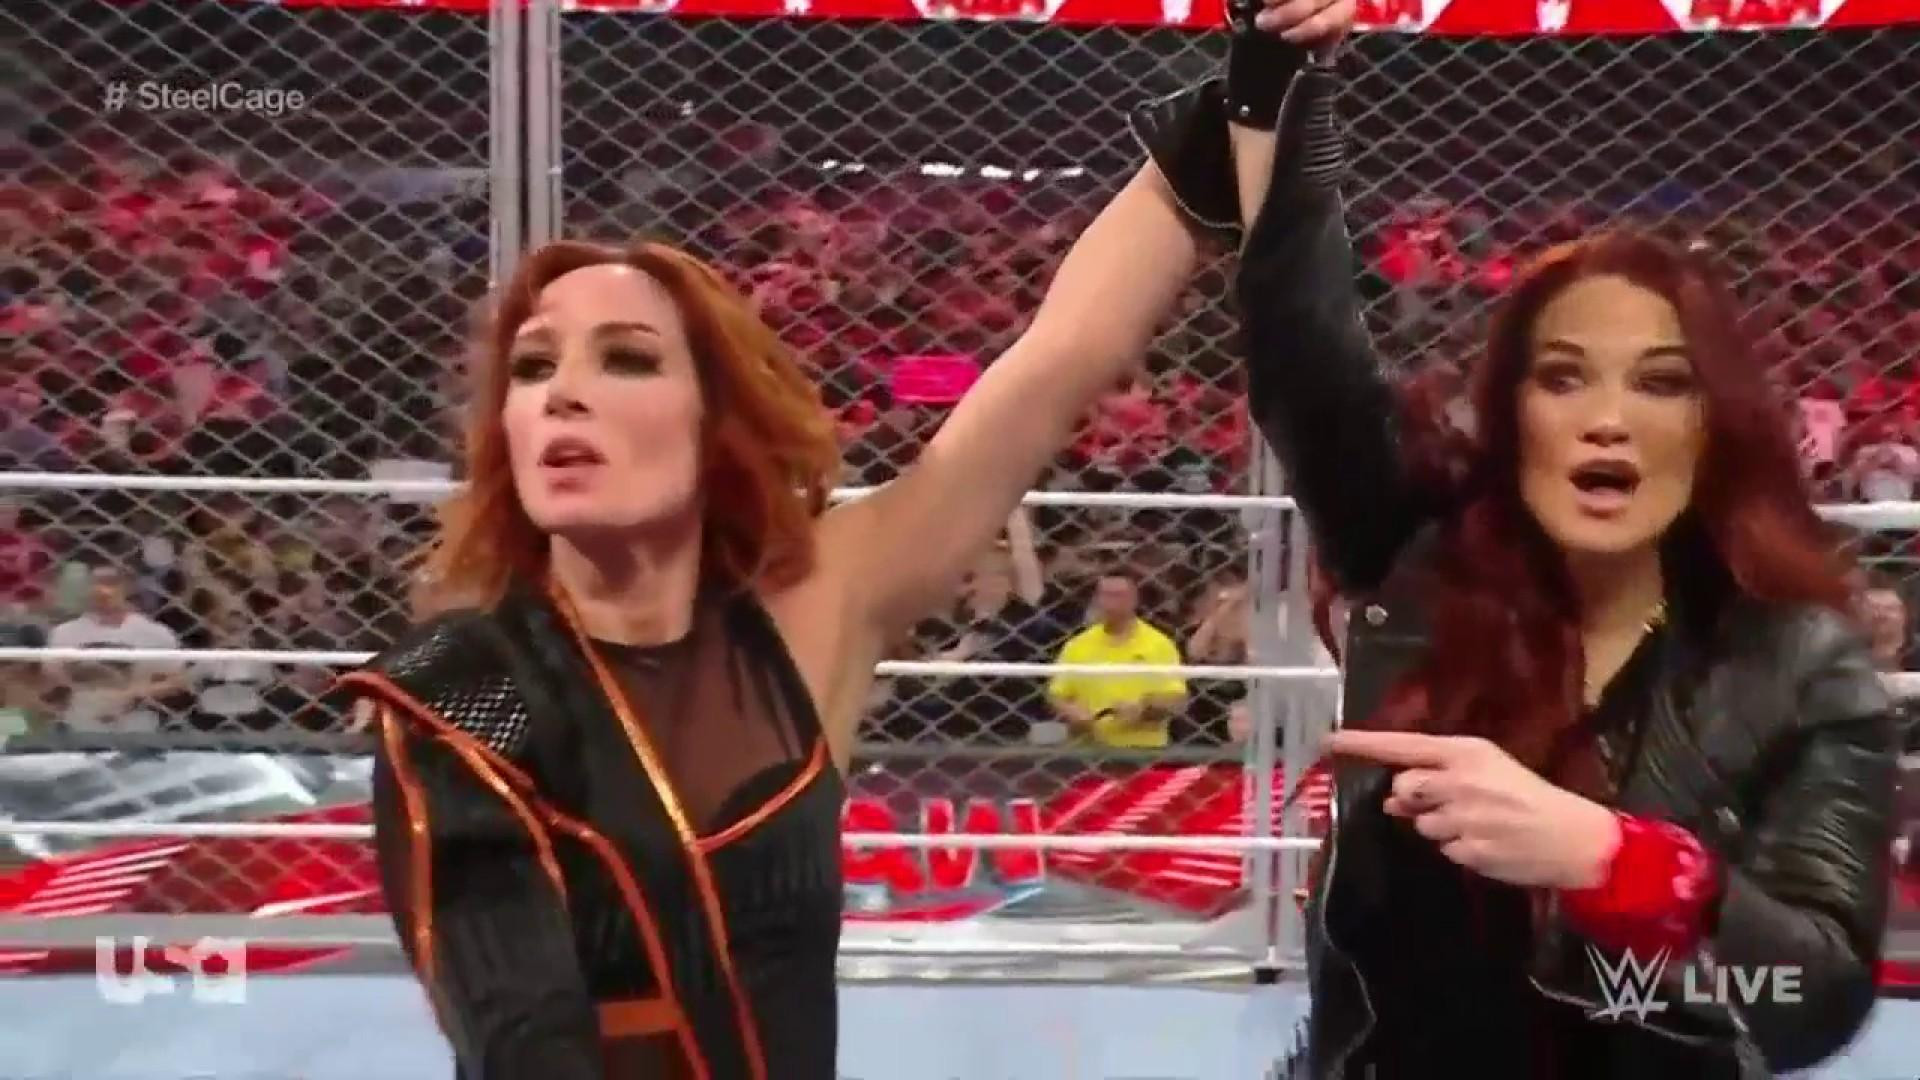 Bayley To Face Becky Lynch In Steel Cage Match On 2/6 WWE RAW